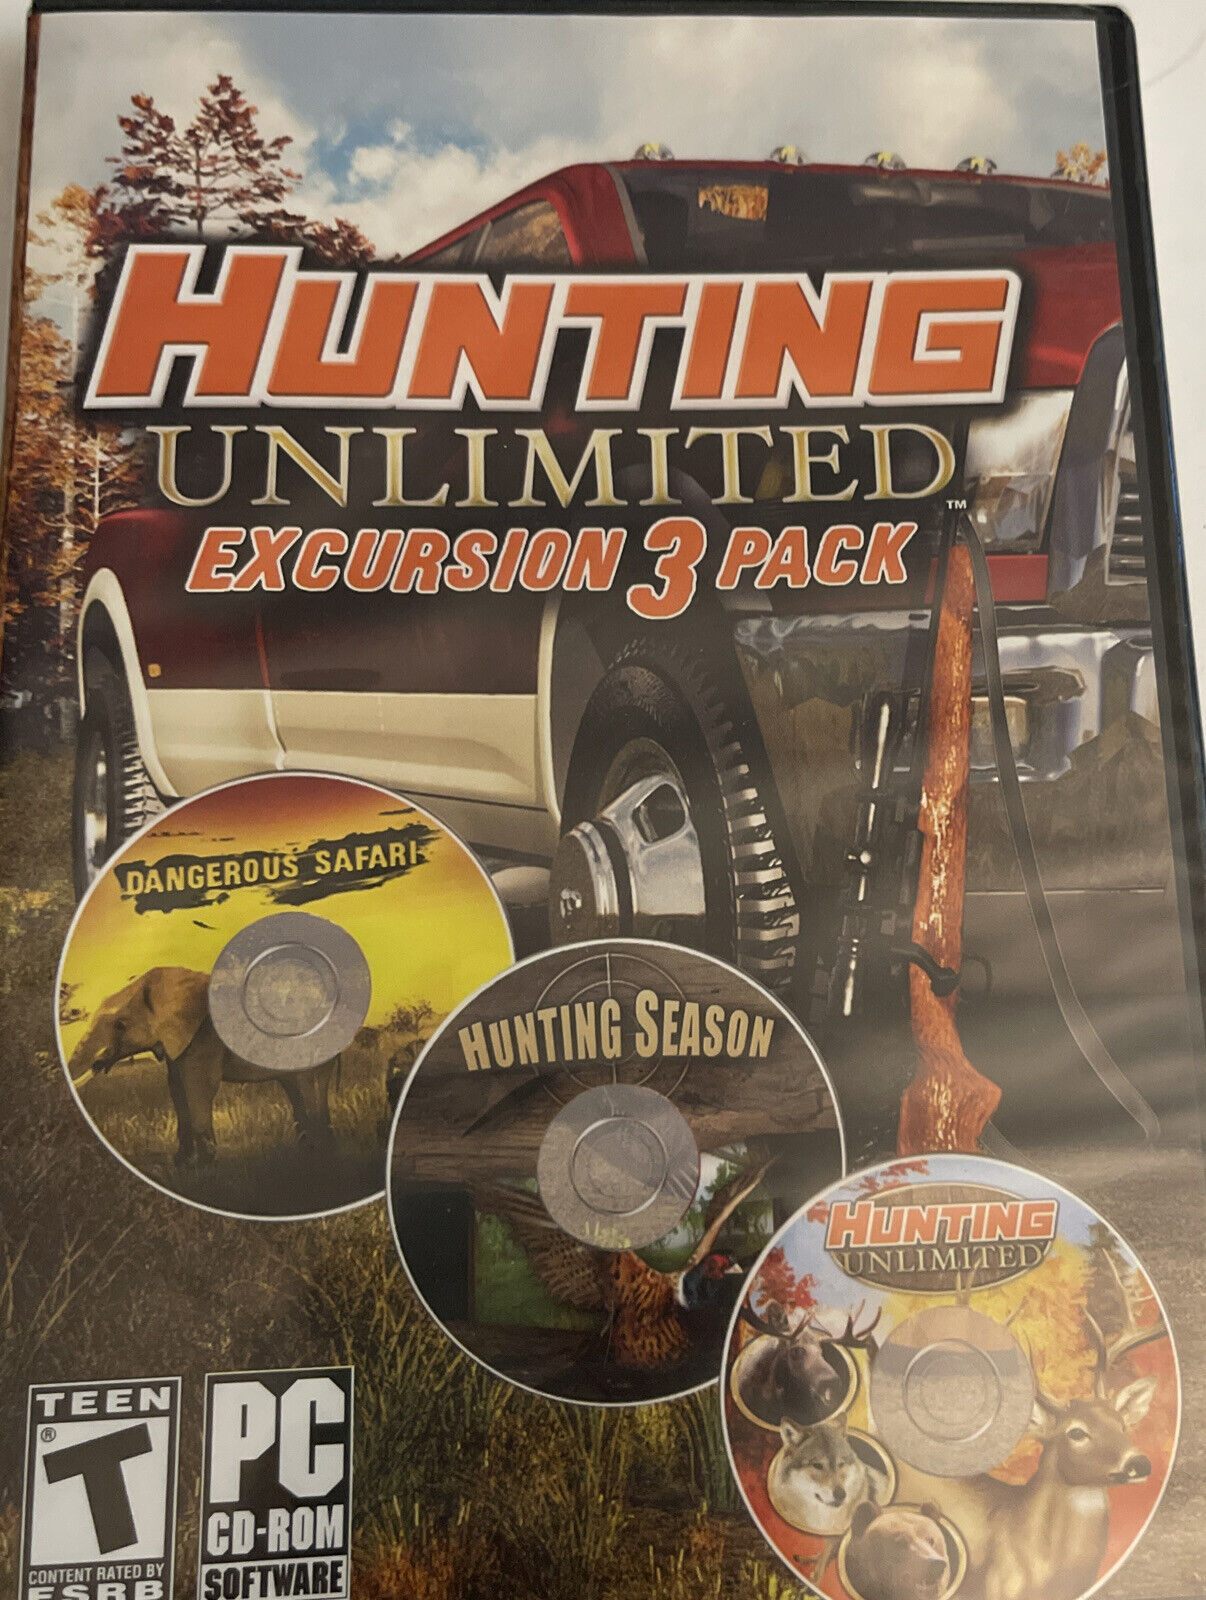 Hunting Unlimited Excursion 3 Pack (PC, 2011) PC CD-ROM SOFTWARE OUTDOOR SPORTS